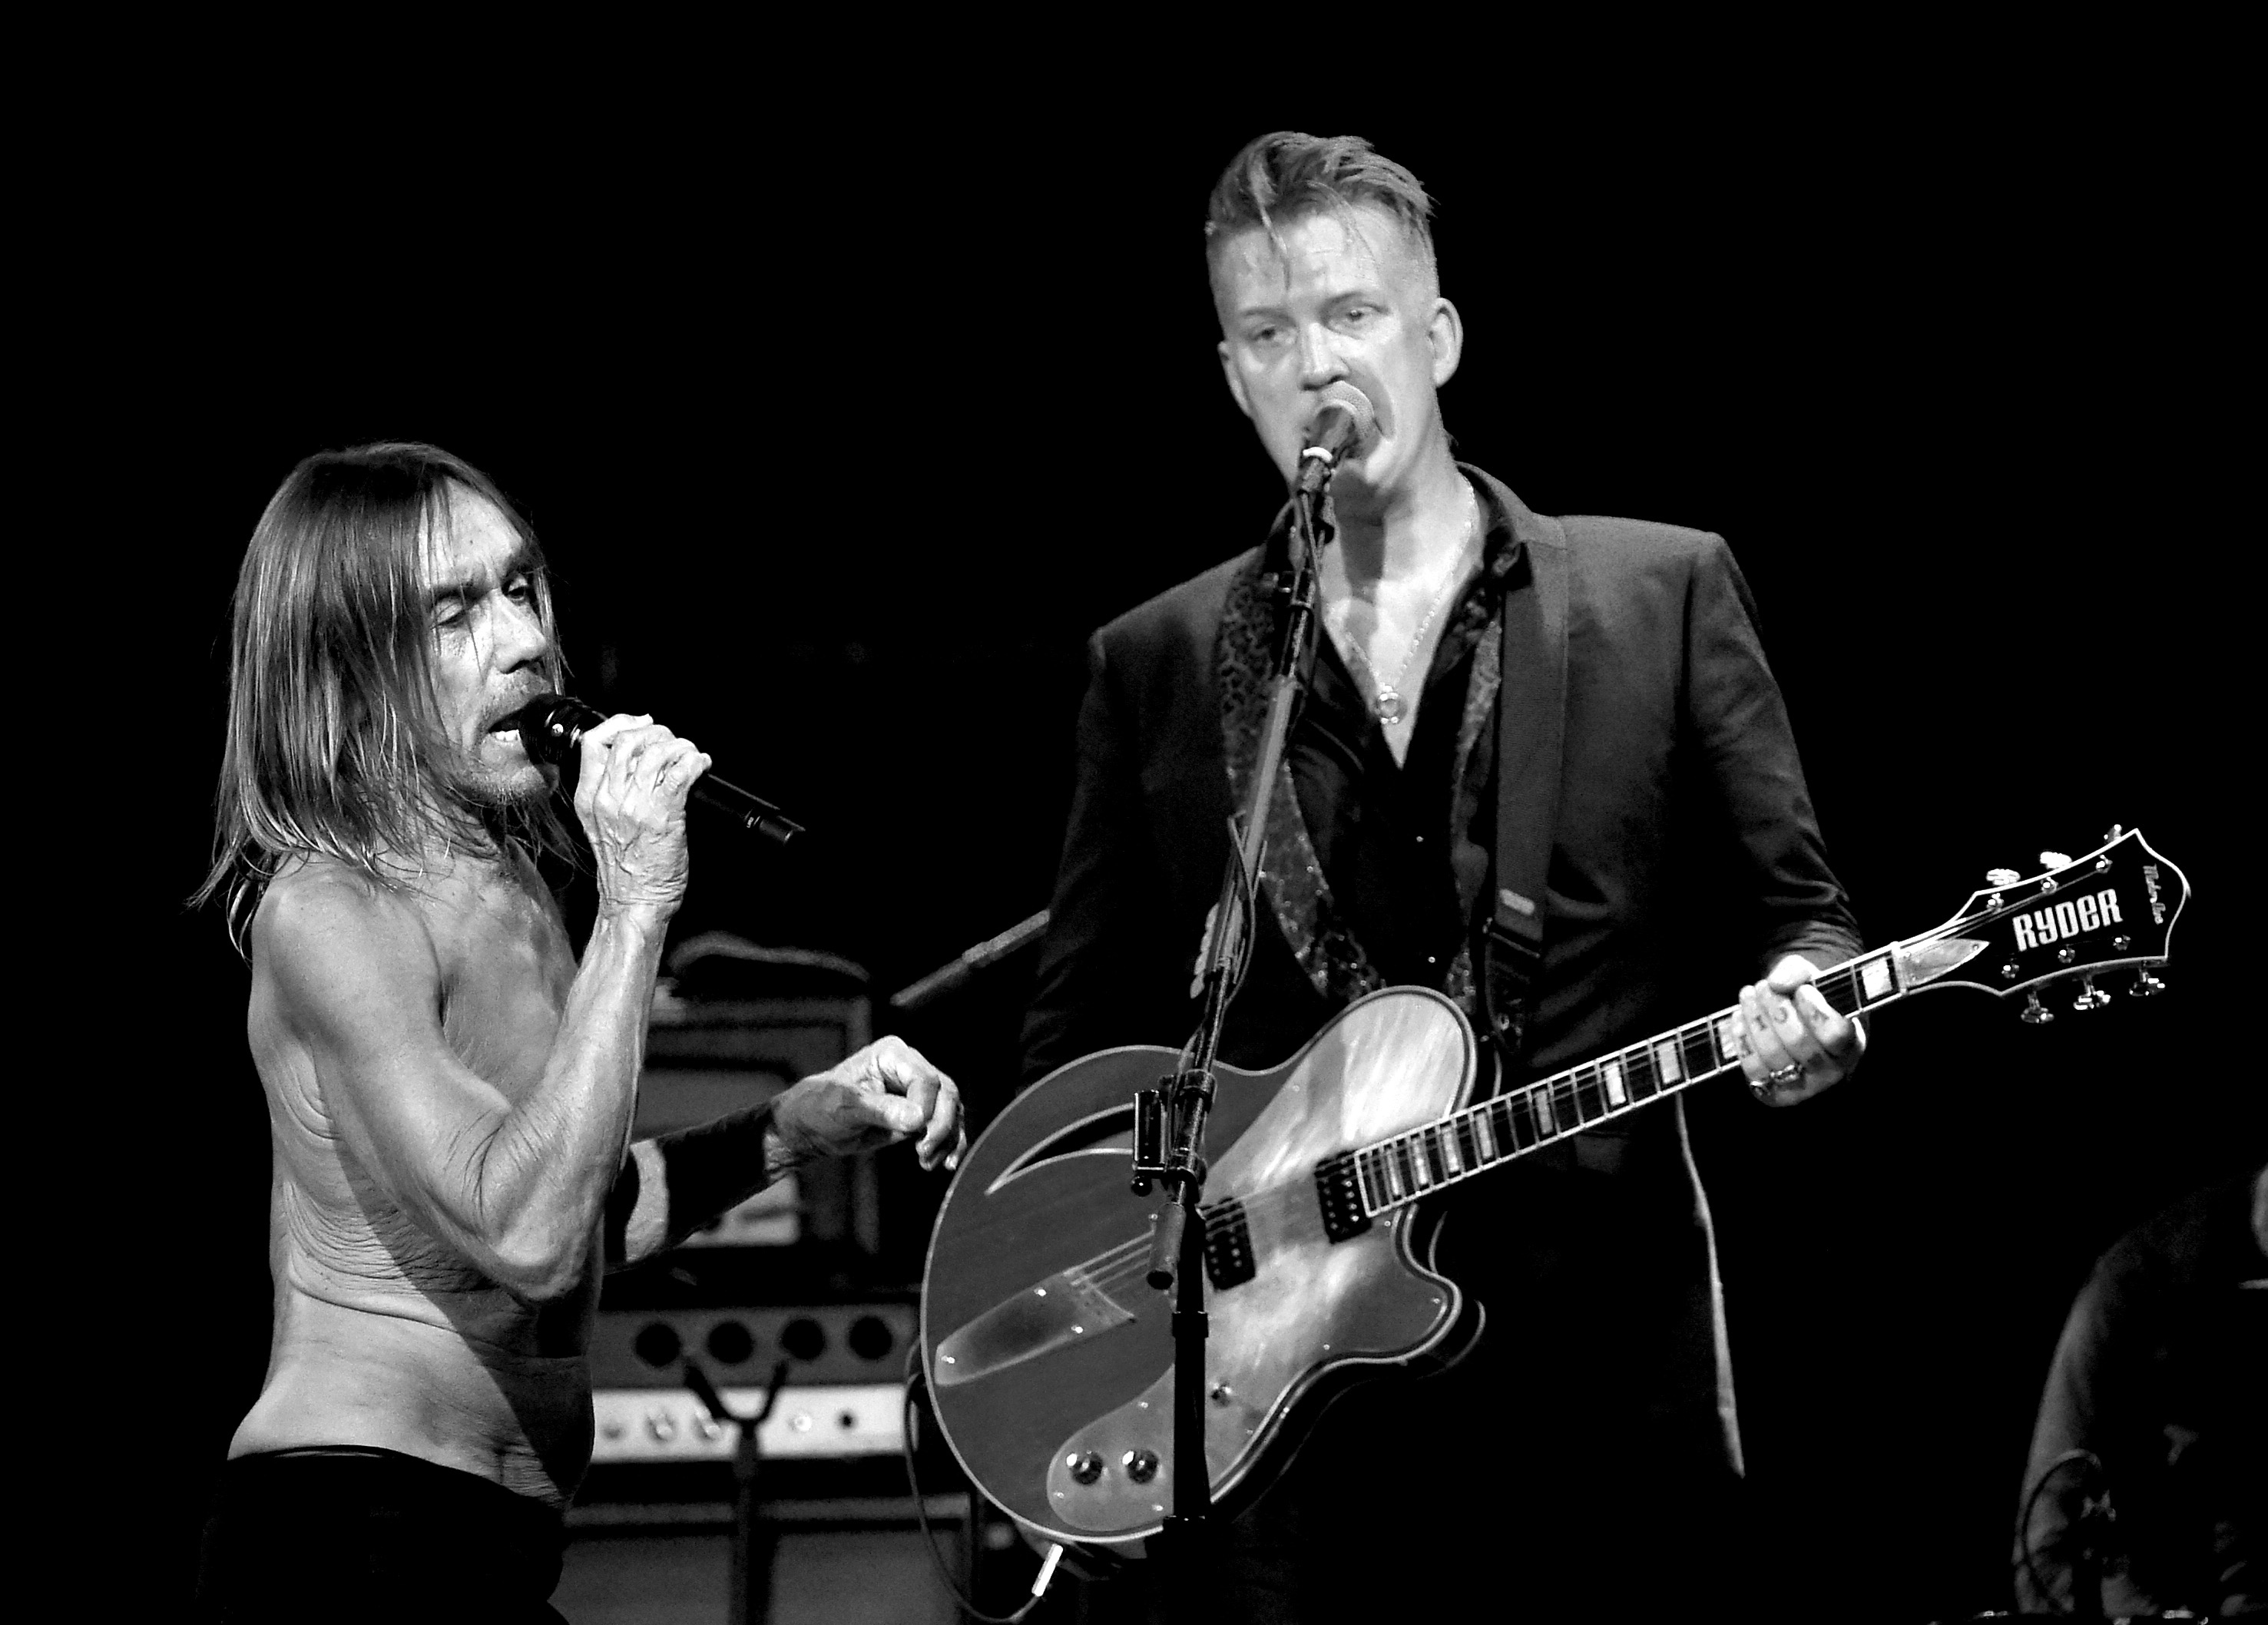 Iggy Pop and Josh Homme Perform at Teragram Ballroom for the Post Pop Depression Tour